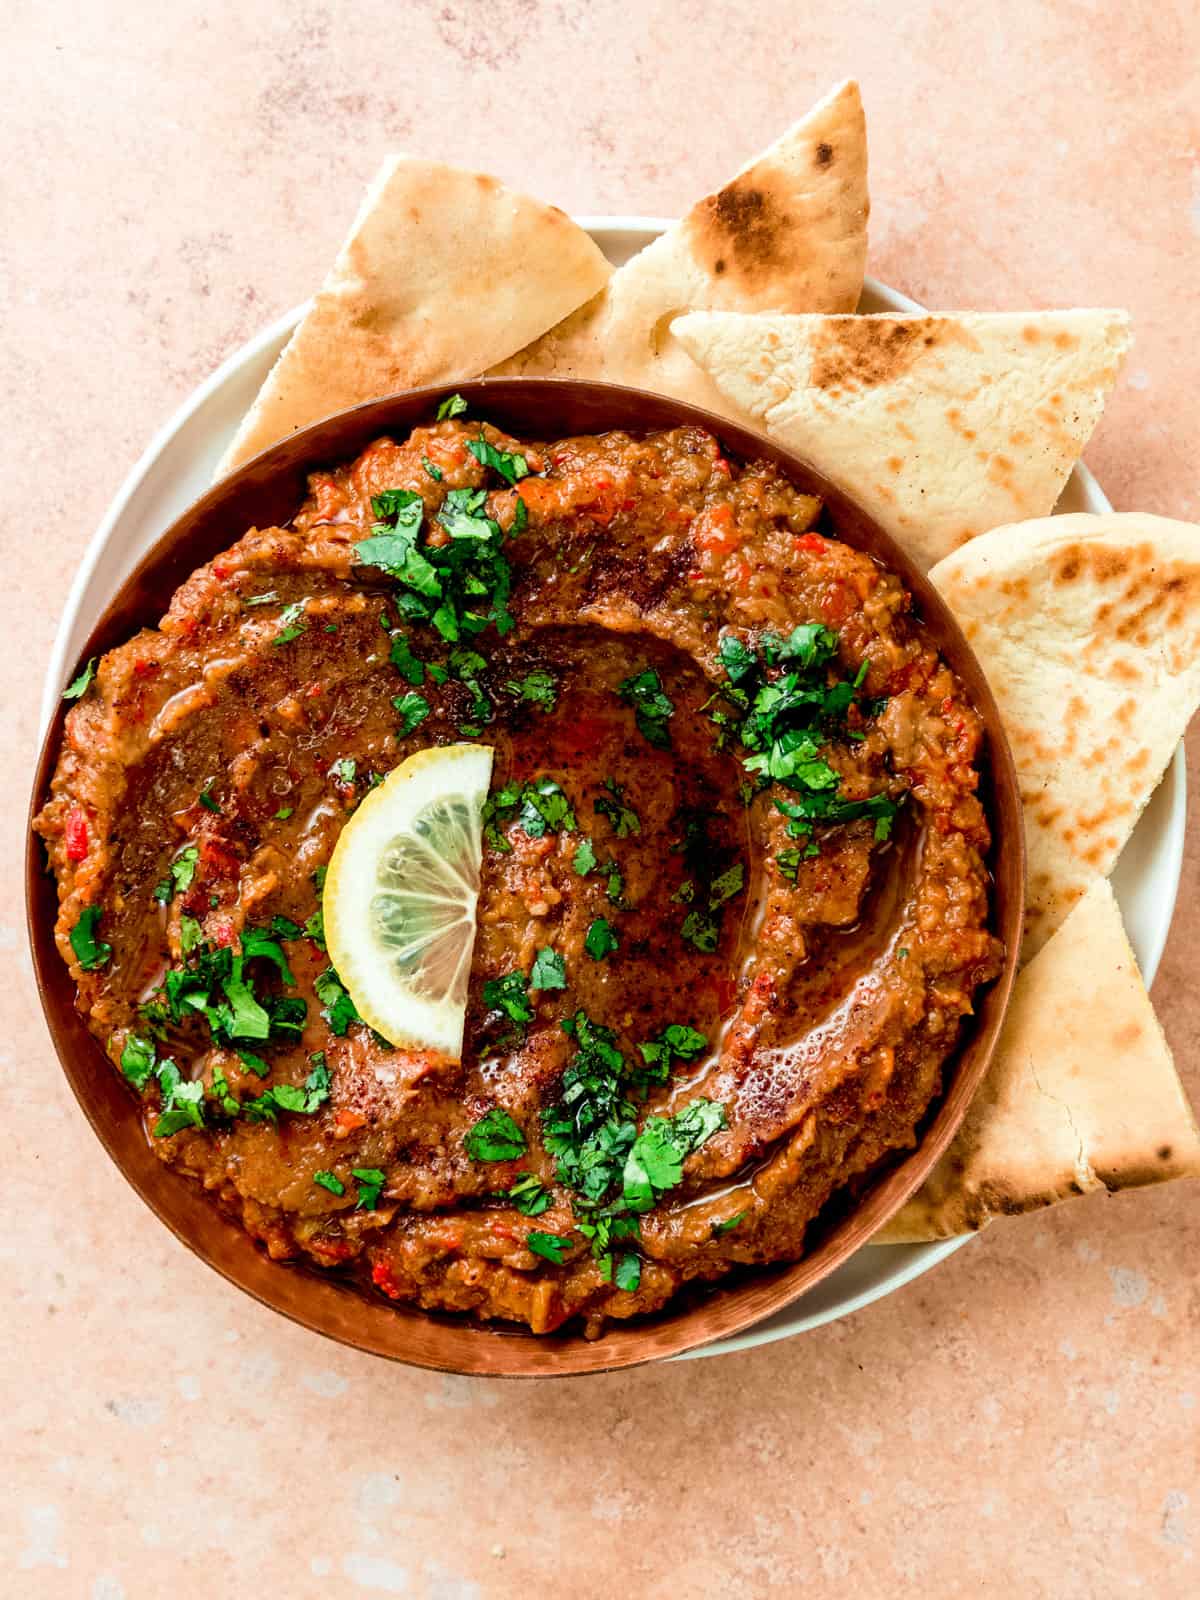 Roasted eggplant dip with bell peppers also known as, baba ganoush without tahini.